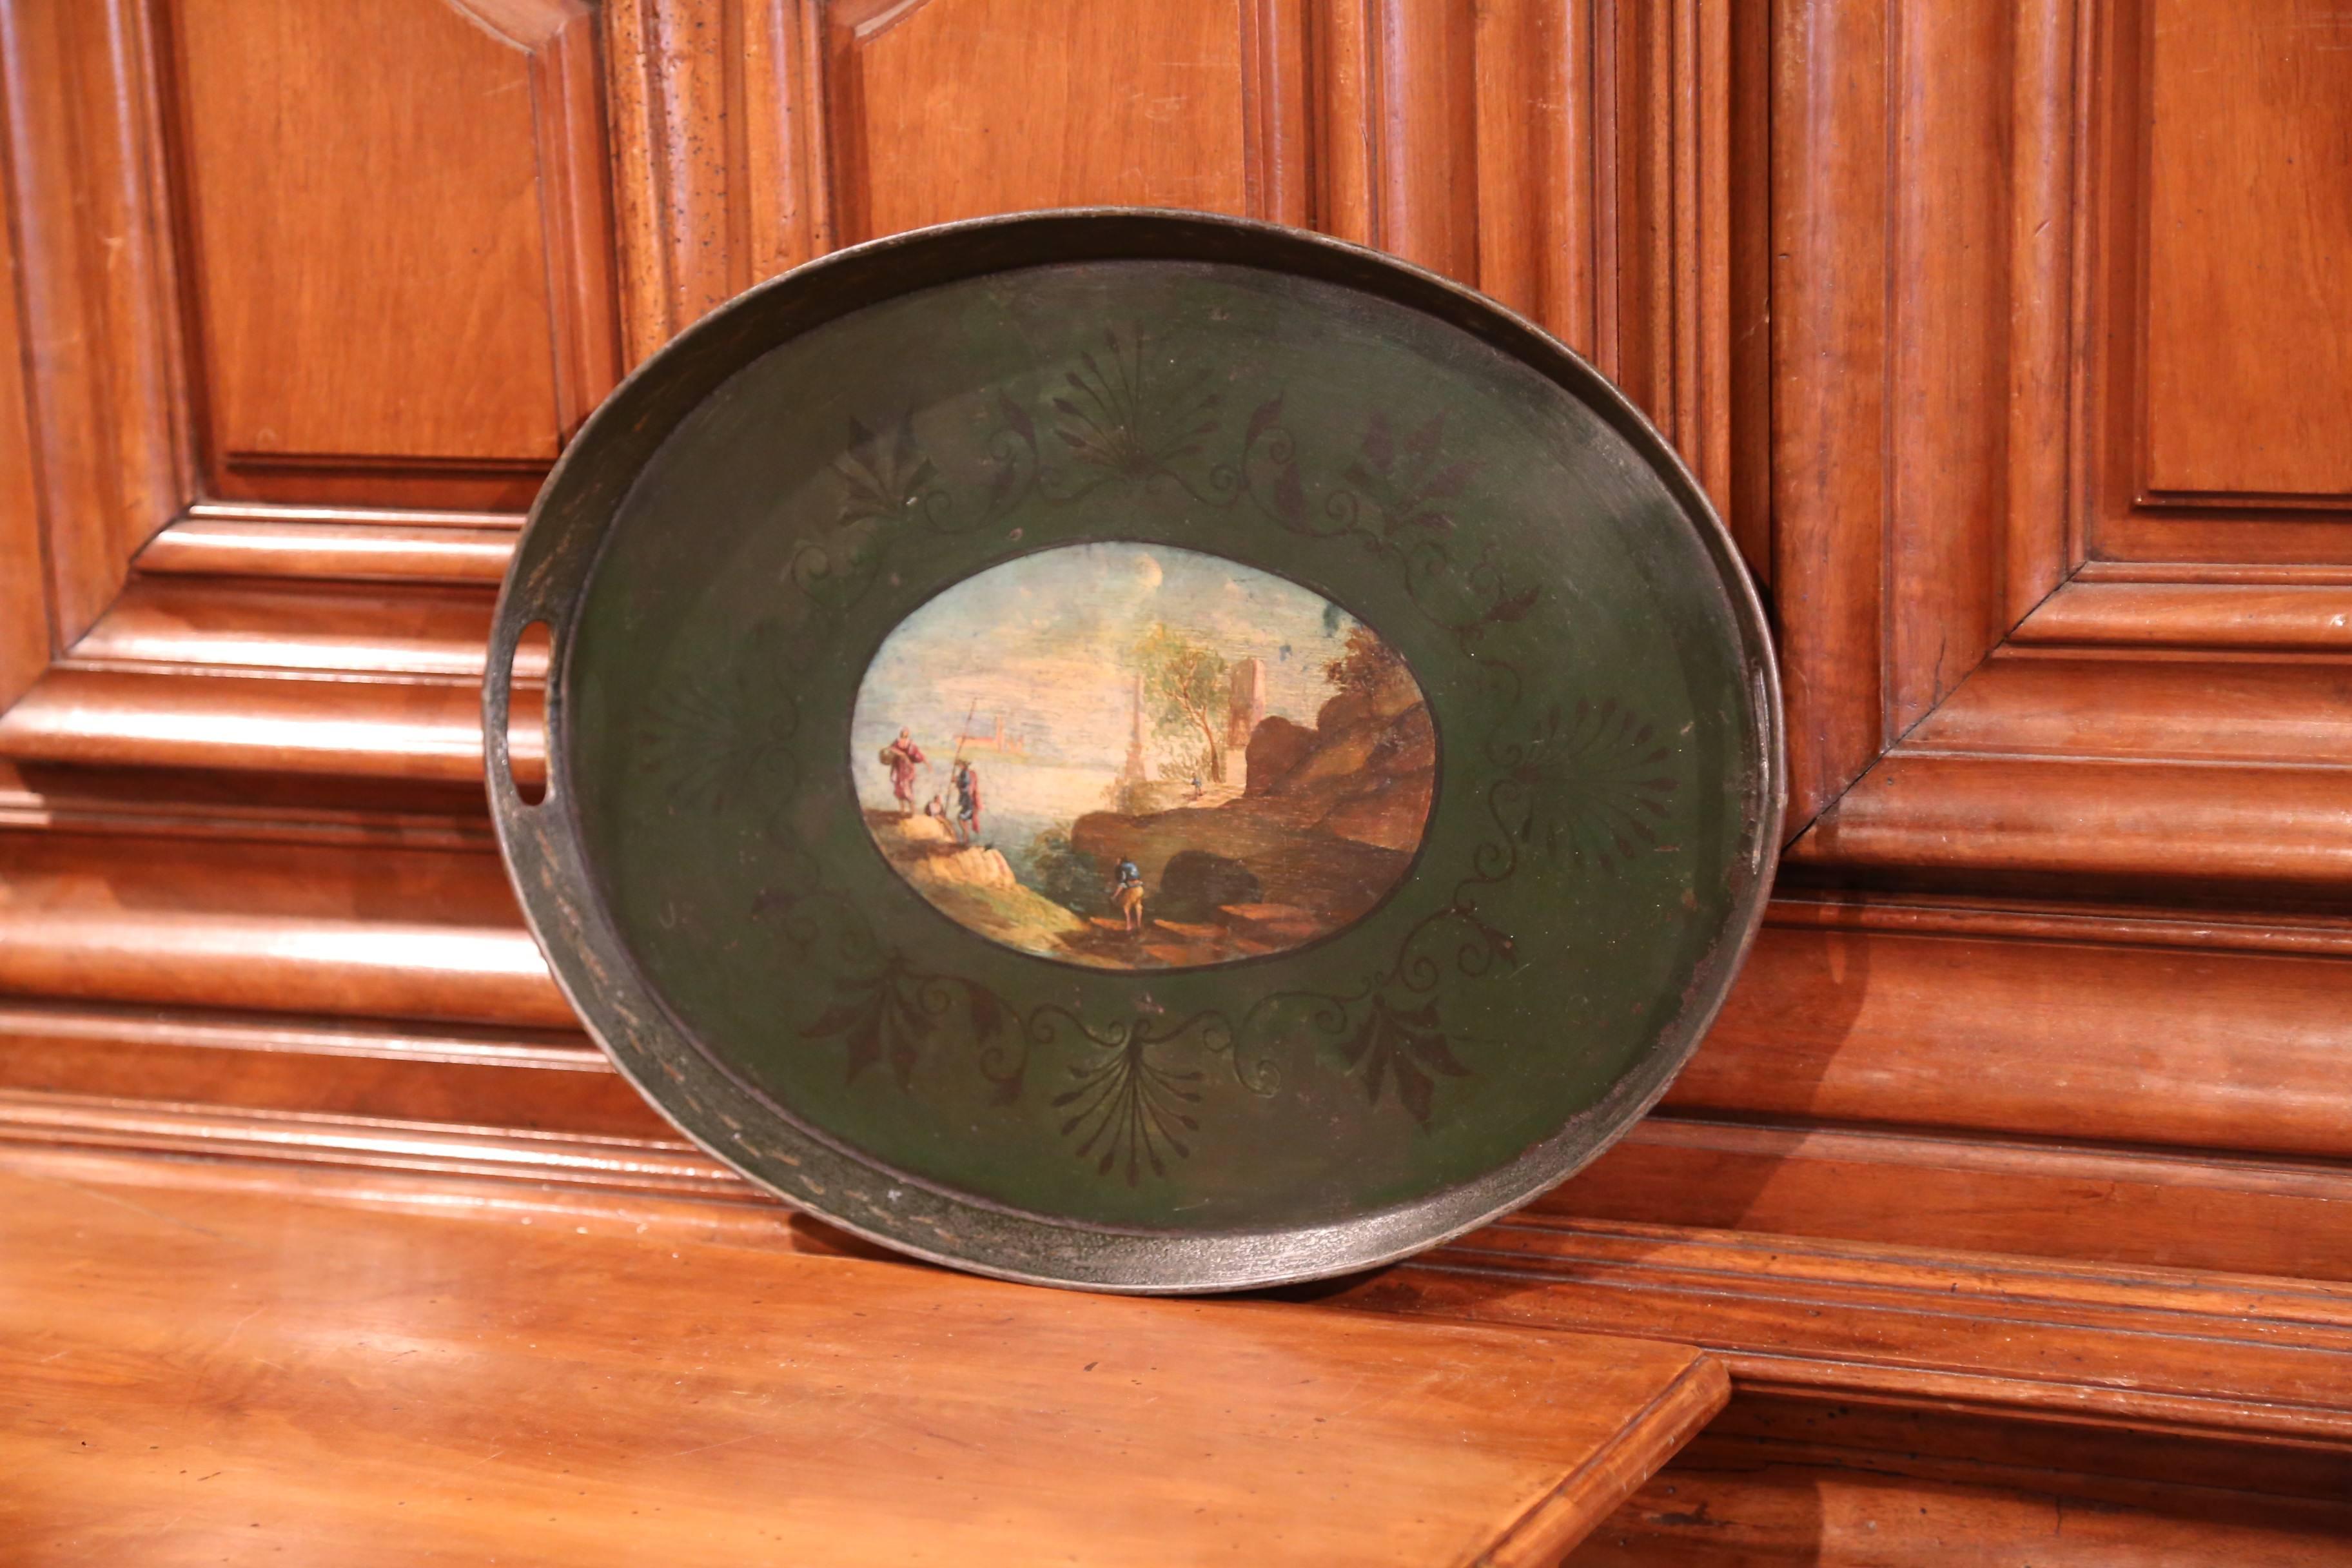 This elegant antique oval tole tray was crafted in France, circa 1870, the colorful platter with side handles, features an oval center medallion with coastline scene, cliffs, trees, fishermen and buildings in the background. The tray table is in